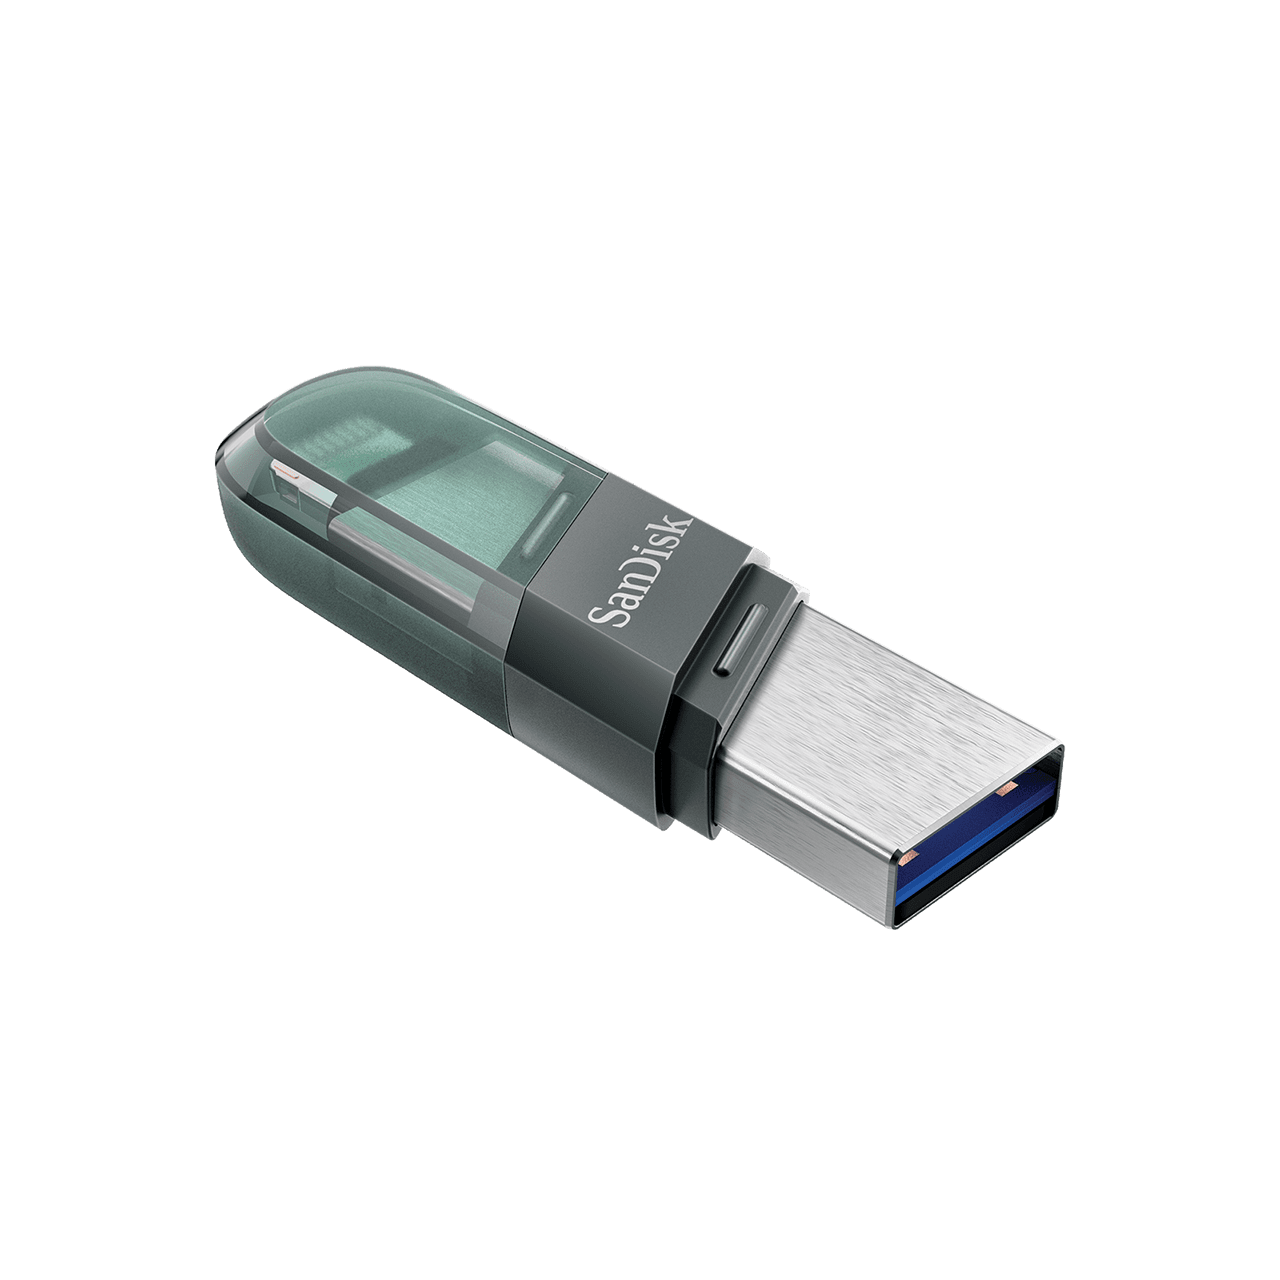 Sandisk OTG Flash Drive iXpand Flip with USB 3.1 and Lightning Connection, Compact Size, iXpand Drive Support, Plug and Play